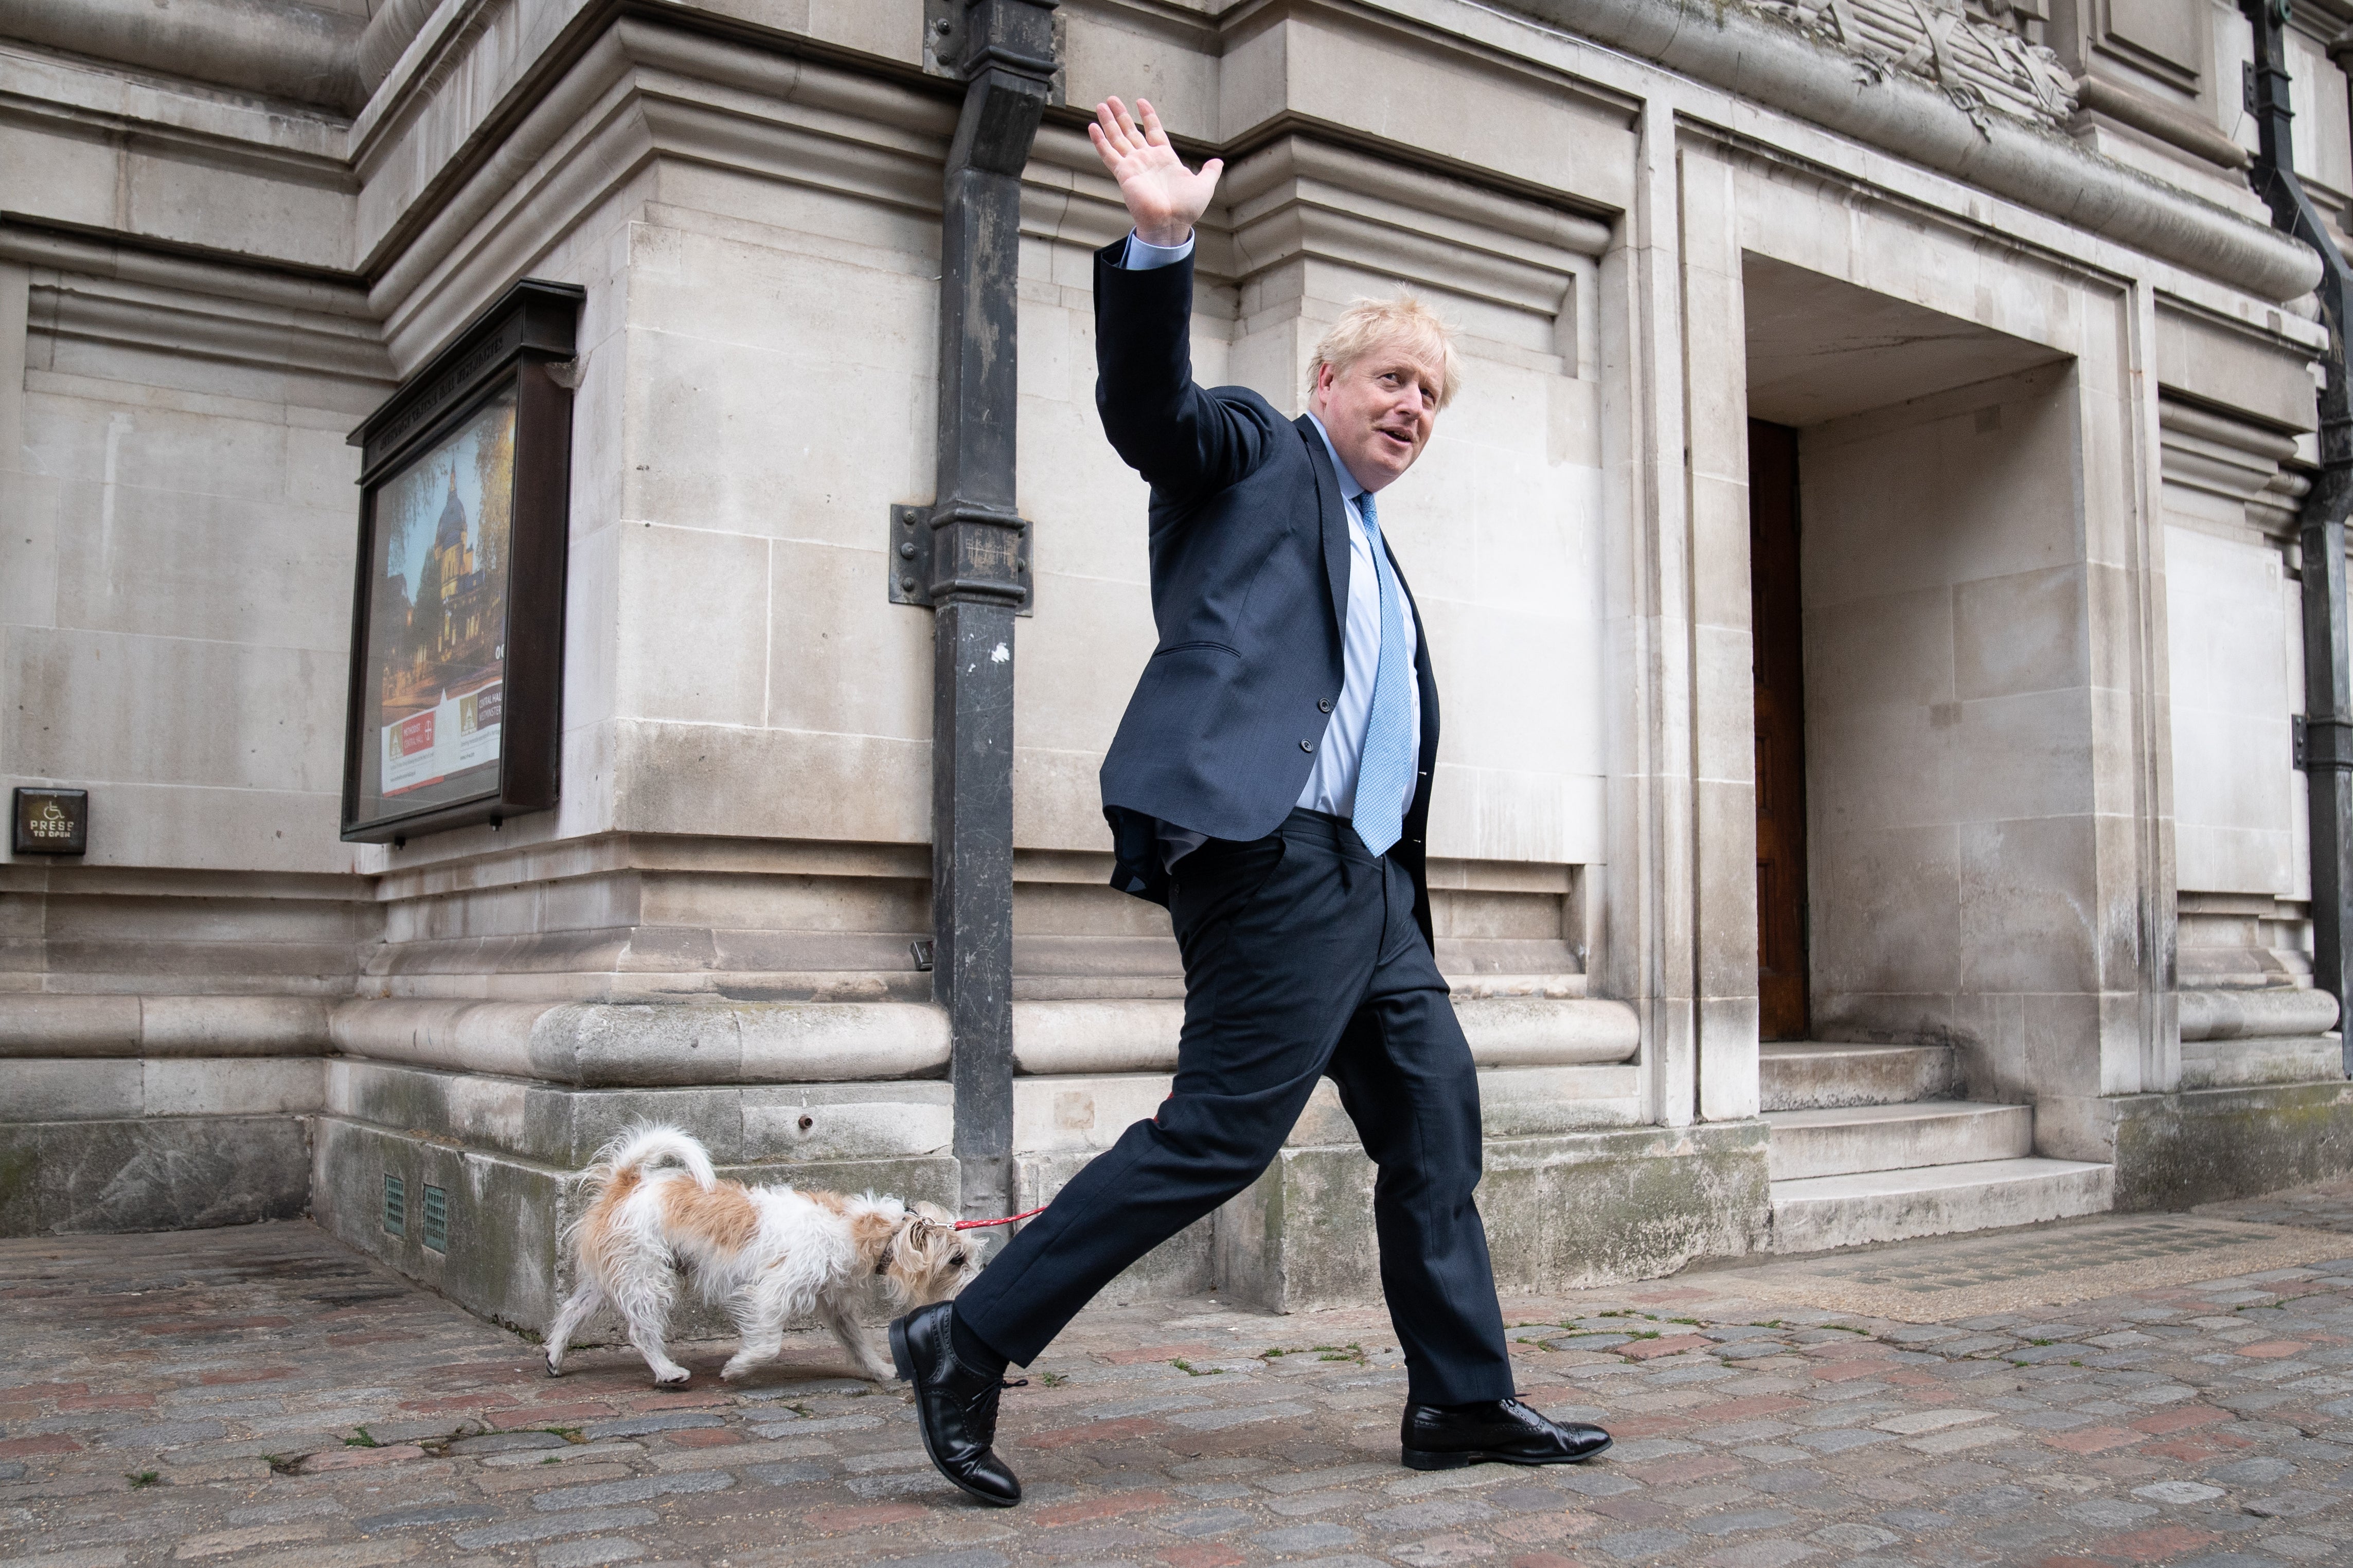 Prime Minister Boris Johnson leaves Methodist Central Hall in London with his dog, Dilyn after voting on Thursday (Stefan Rousseau/PA)